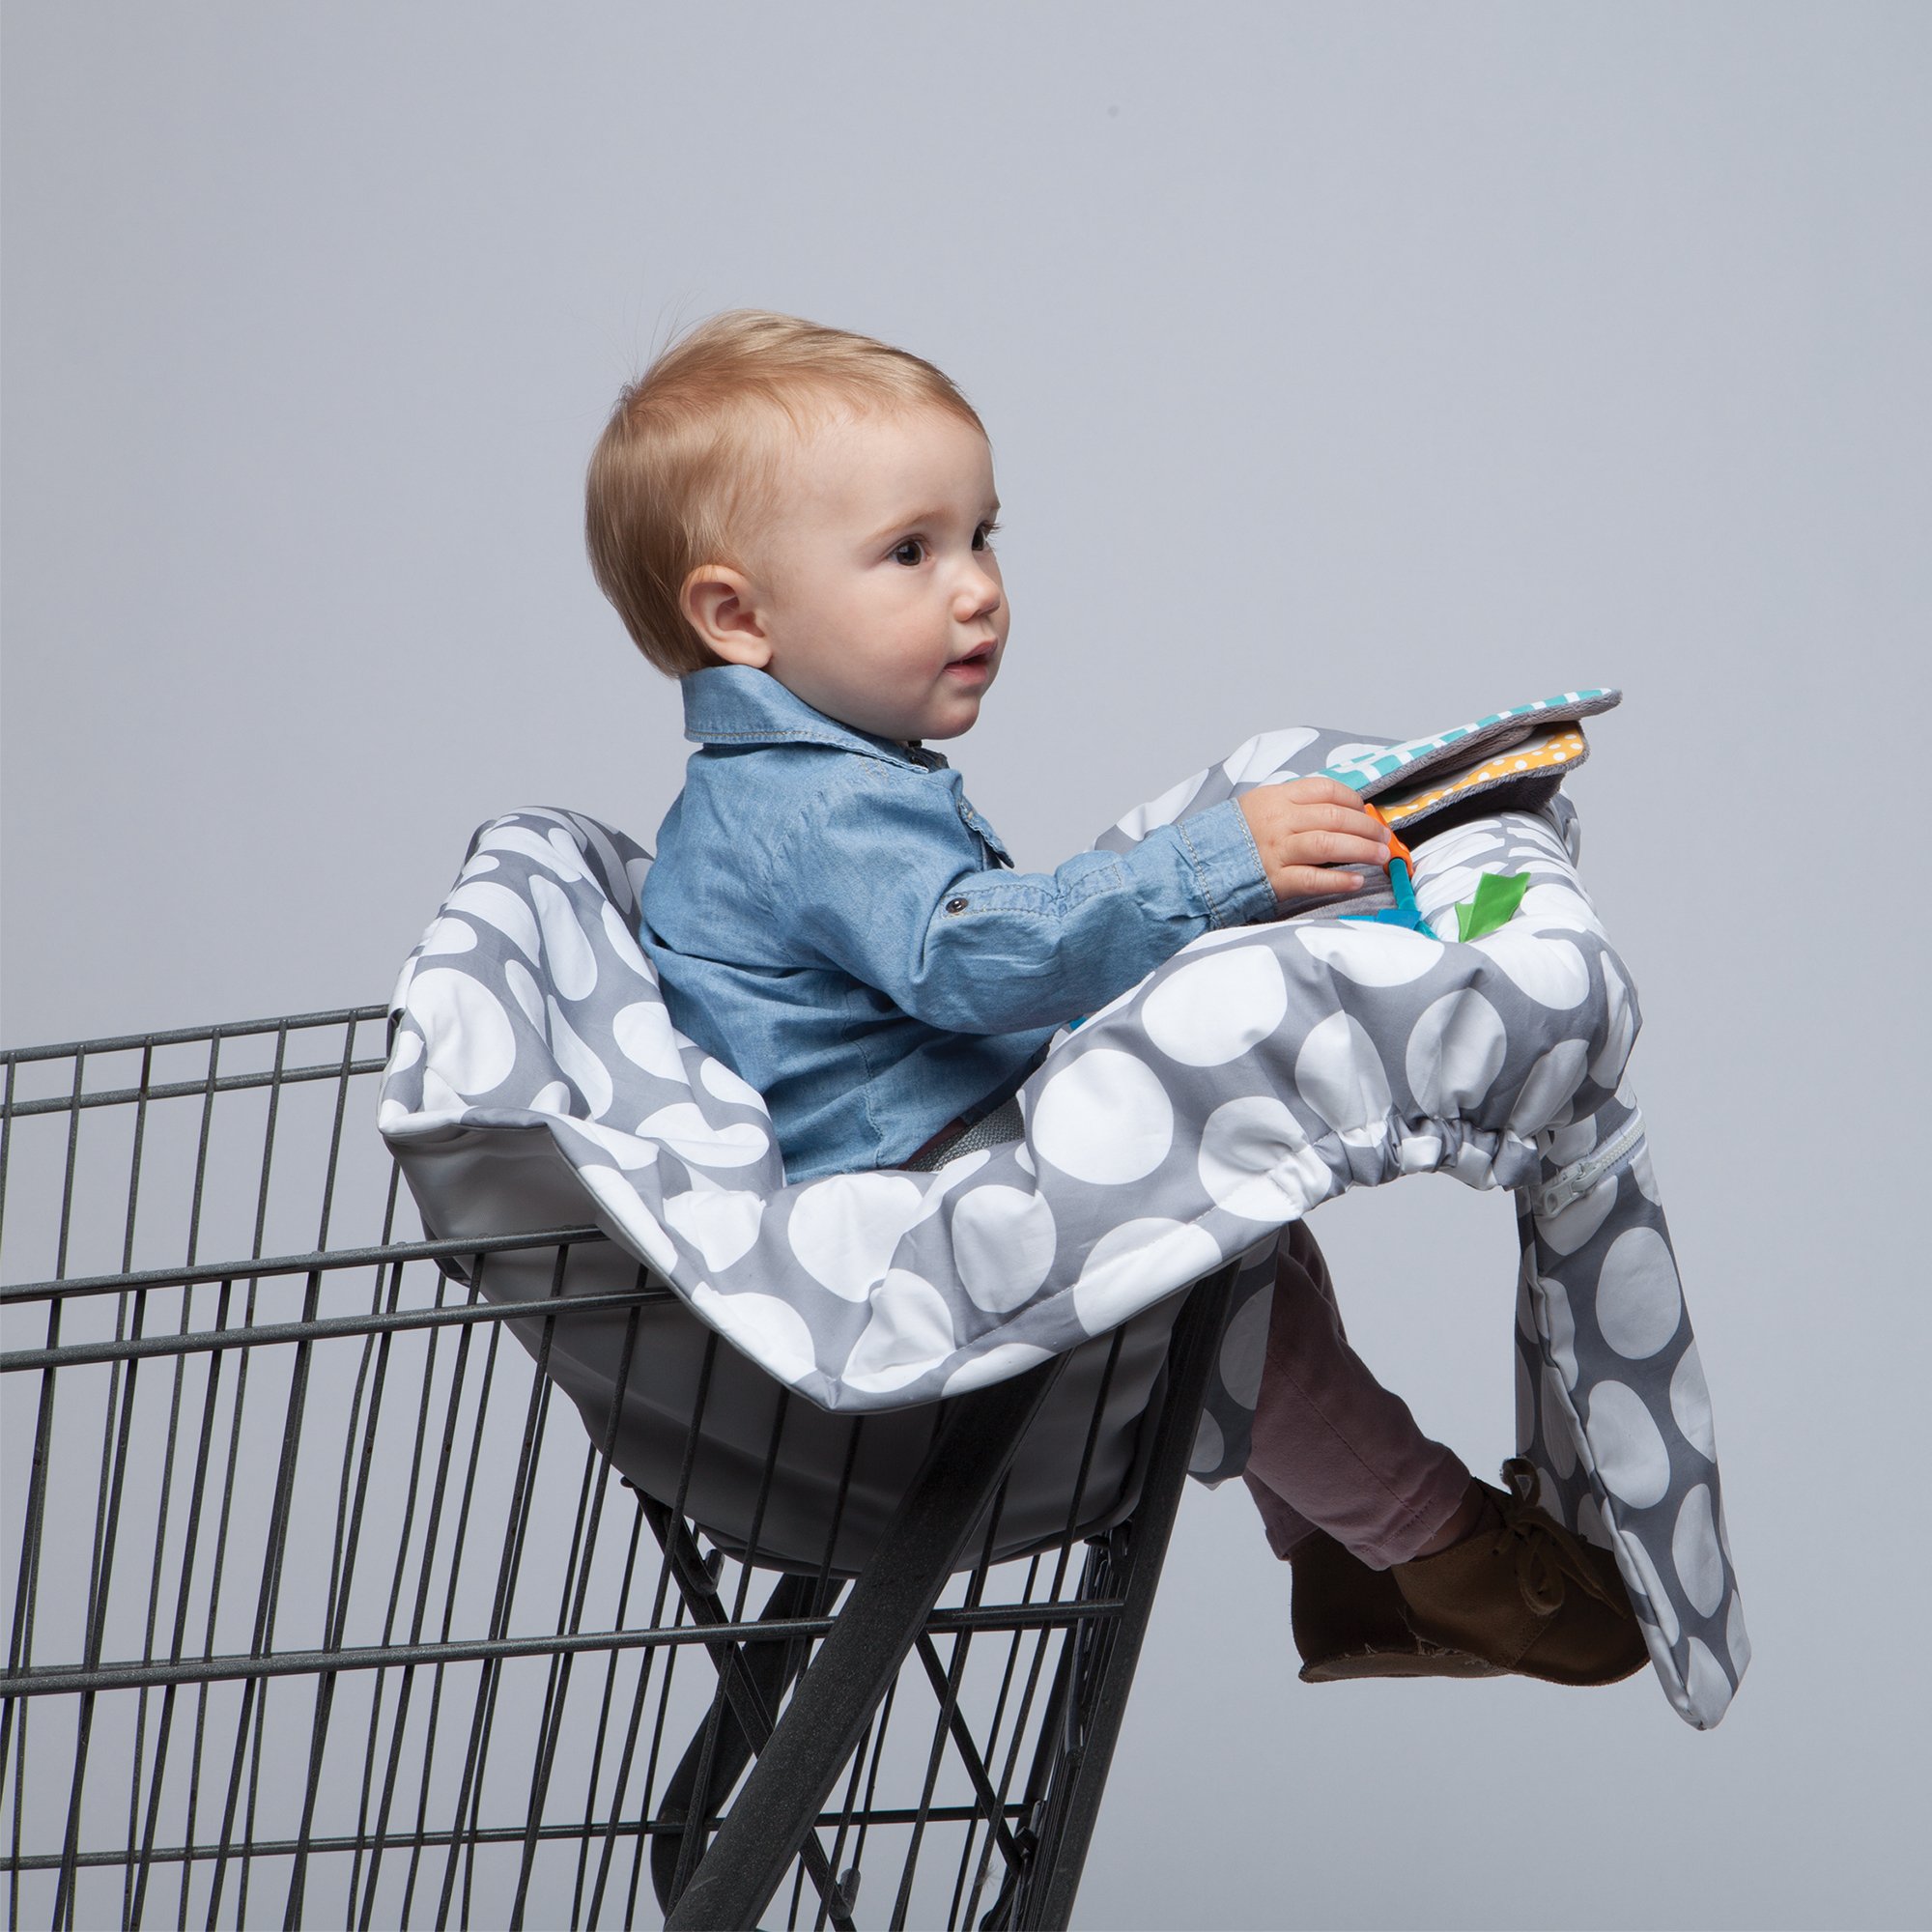 Boppy Preferred Shopping Cart and High Chair Cover with Storage Pouch, Gray Jumbo Dots with Changeable SlideLine Toy, Plush Minky Seat, 2-point Safety Belt, Wipeable and Machine Washable, 6-48 months